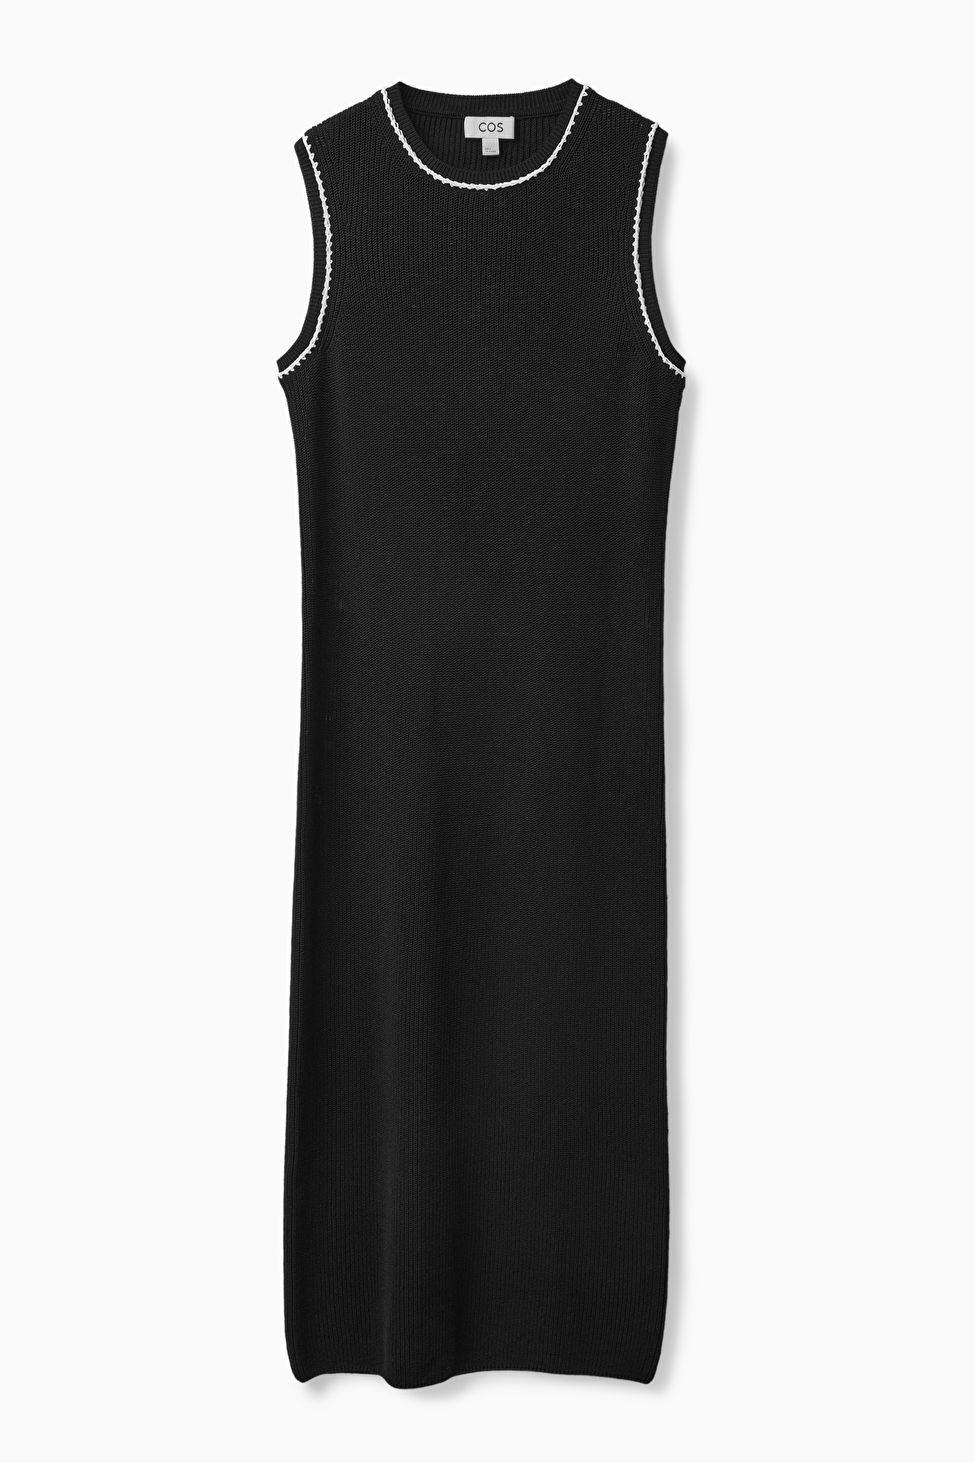 KNITTED MIDI DRESS - BLACK - COS | COS UK